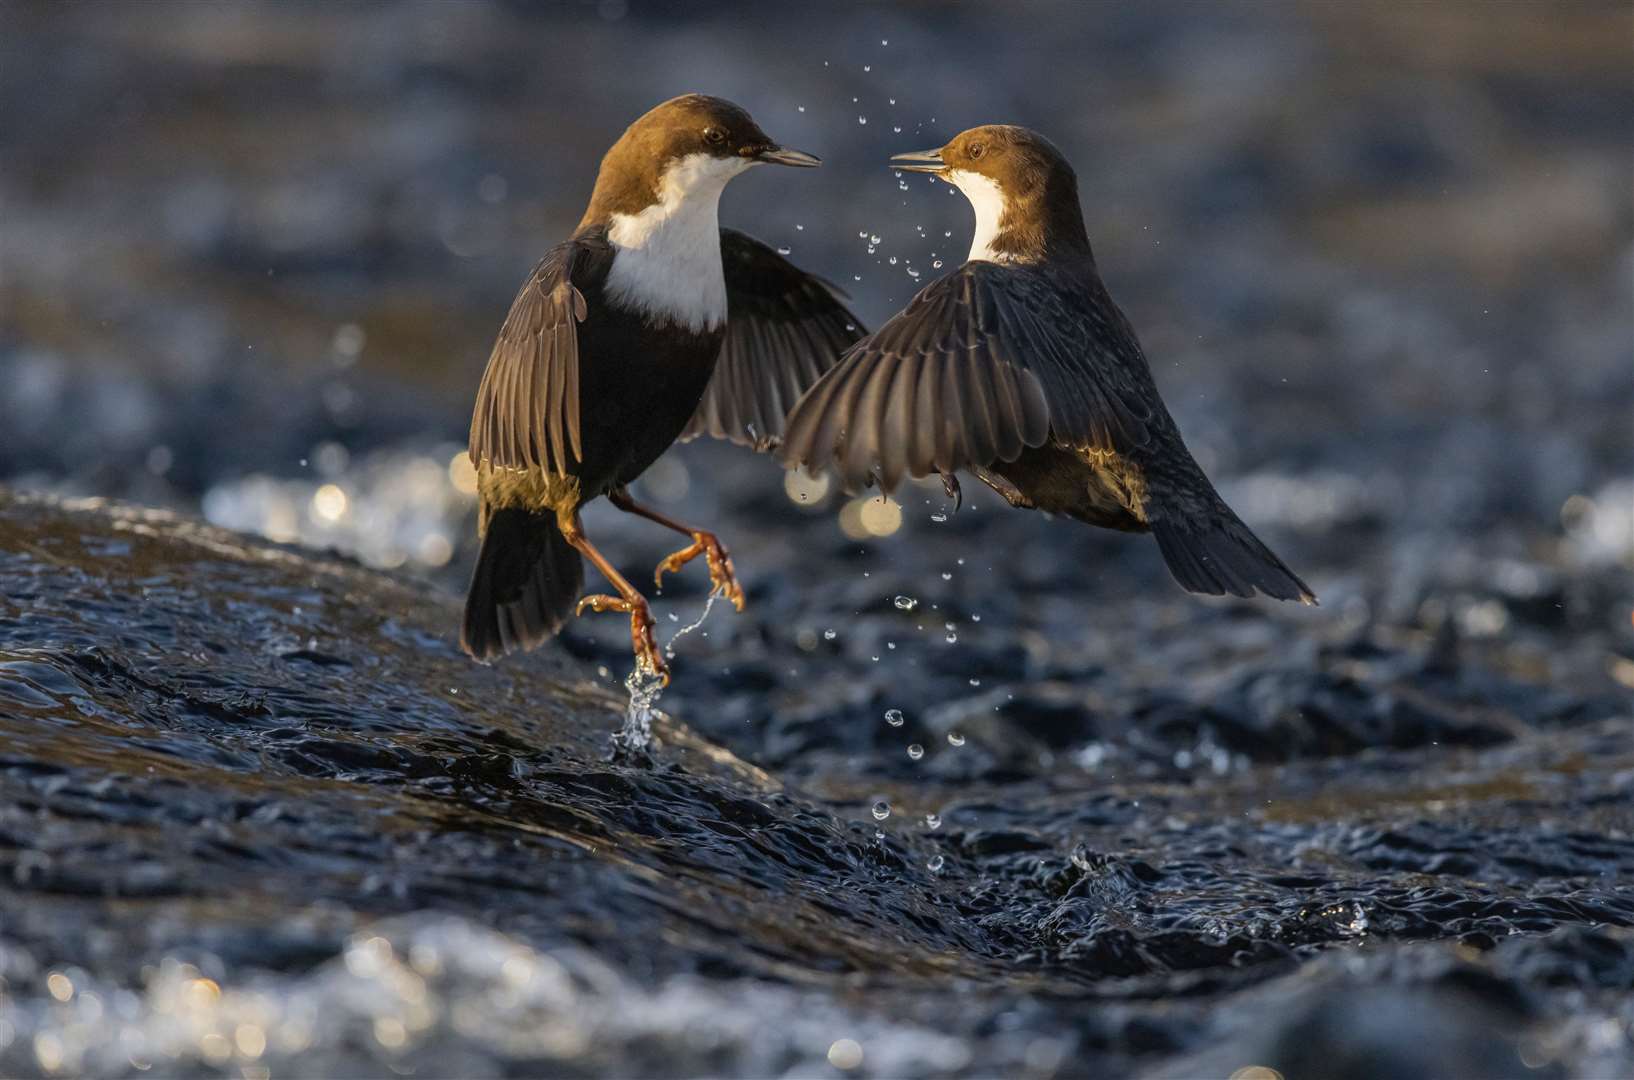 Dipper dispute by Heikki Nikki, which has been highly commended in the Behaviour: Birds category at the Wildlife Photographer of the Year competition )Heikki Nikki/Wildlife Photographer of the Year)